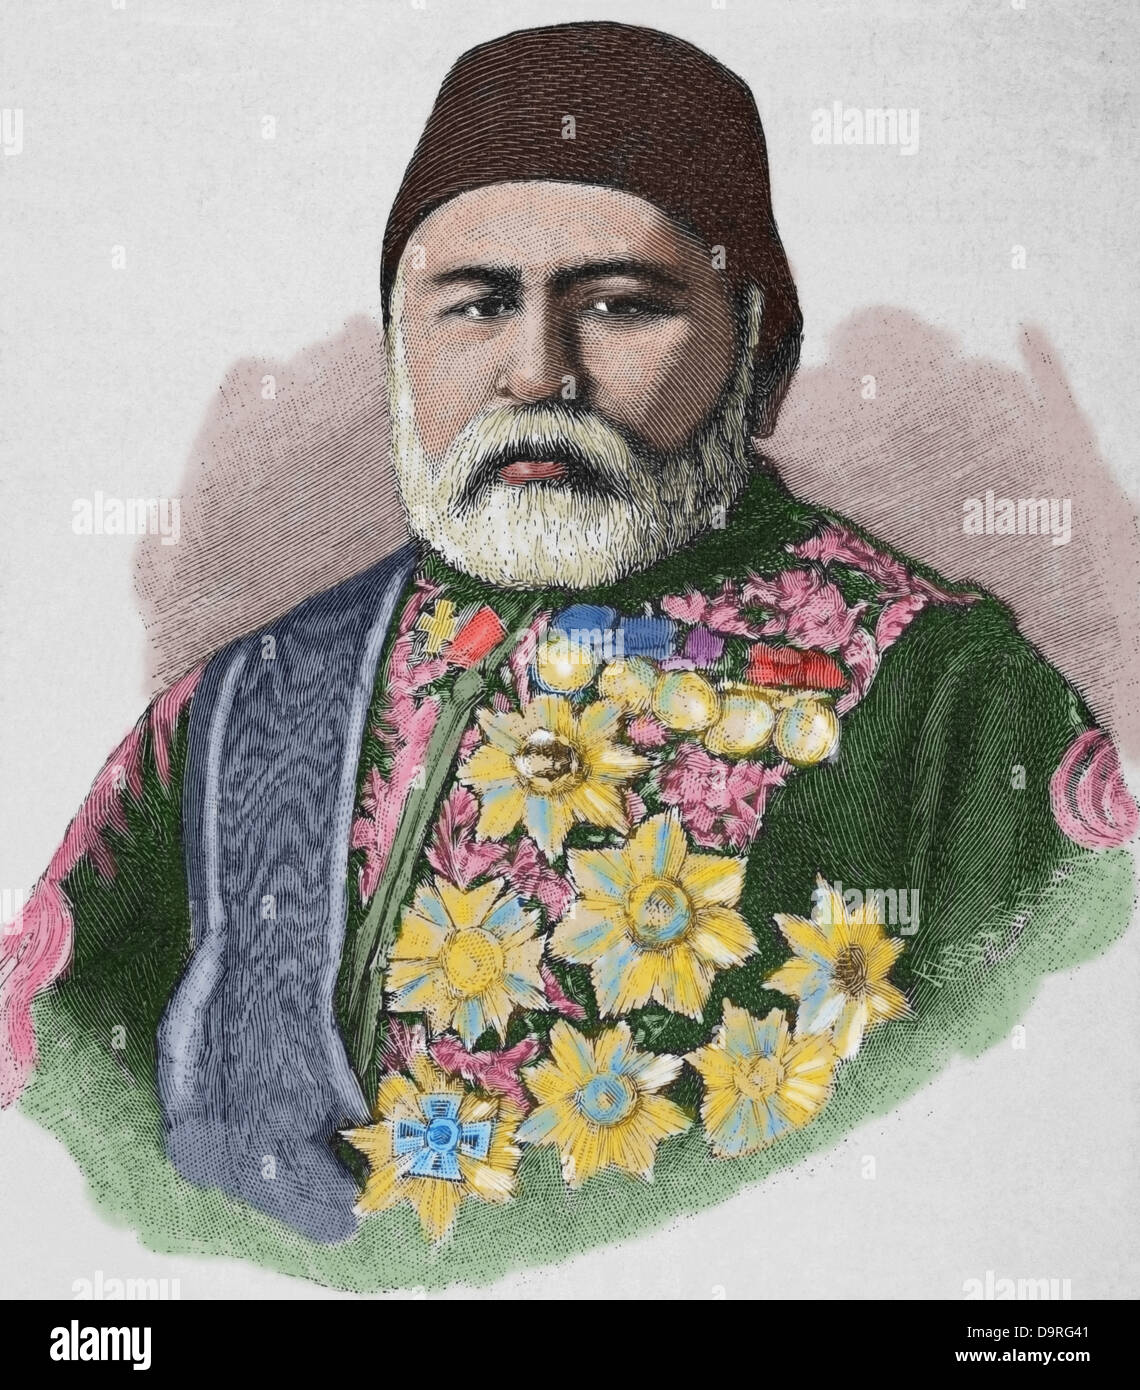 Hussein Awni pasha (1819 1876). Was a Turkish general and statesman. Engraving by Klose. 'Nuestro Siglo', 1883. Colored. Stock Photo